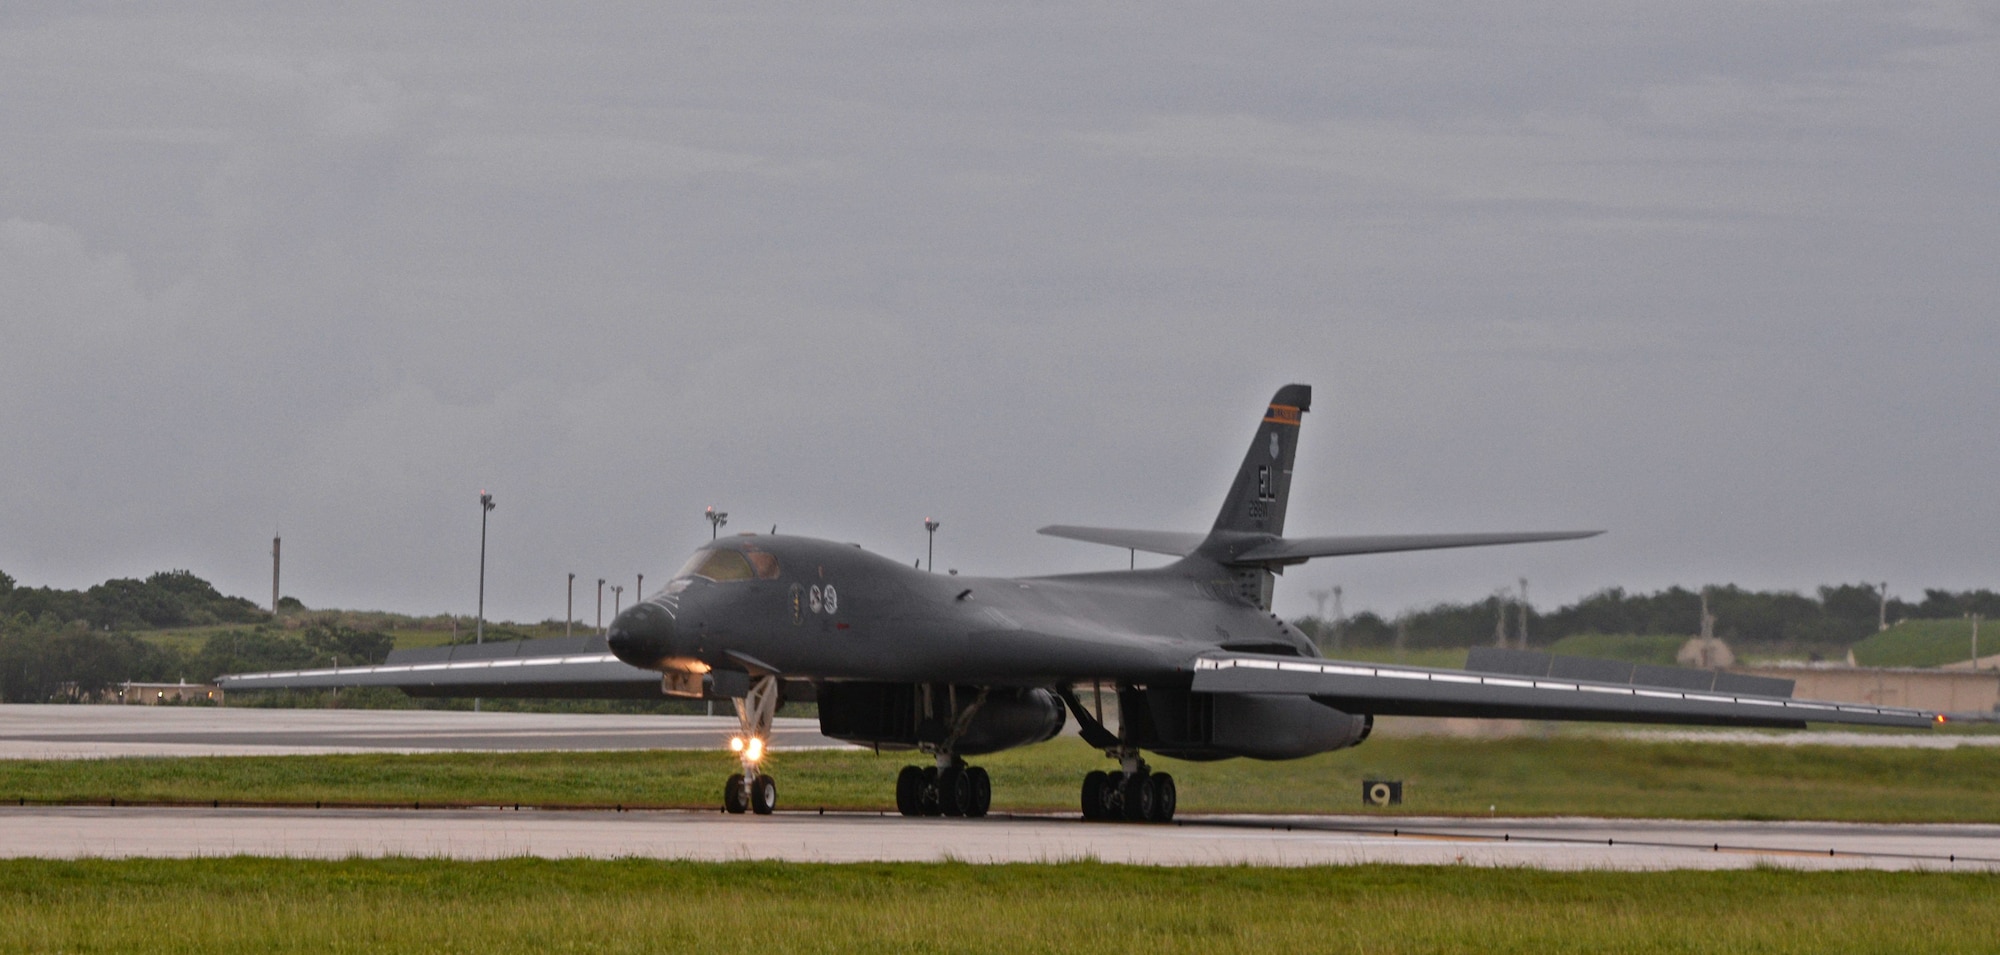 A B-1B Lancer assigned to the 34th Expeditionary Bomb Squadron, deployed from Ellsworth Air Force Base, S.D., lands Aug. 6, 2016, at Andersen AFB, Guam. The B-1s last participated in the U.S. Pacific Command’s Continuous Bomber Presence mission approximately 10 years ago and are returning to support USPACOM in conducting routine, strategic deterrence and regional training missions. (U.S. Air Force photo by Senior Airman Joshua Smoot)